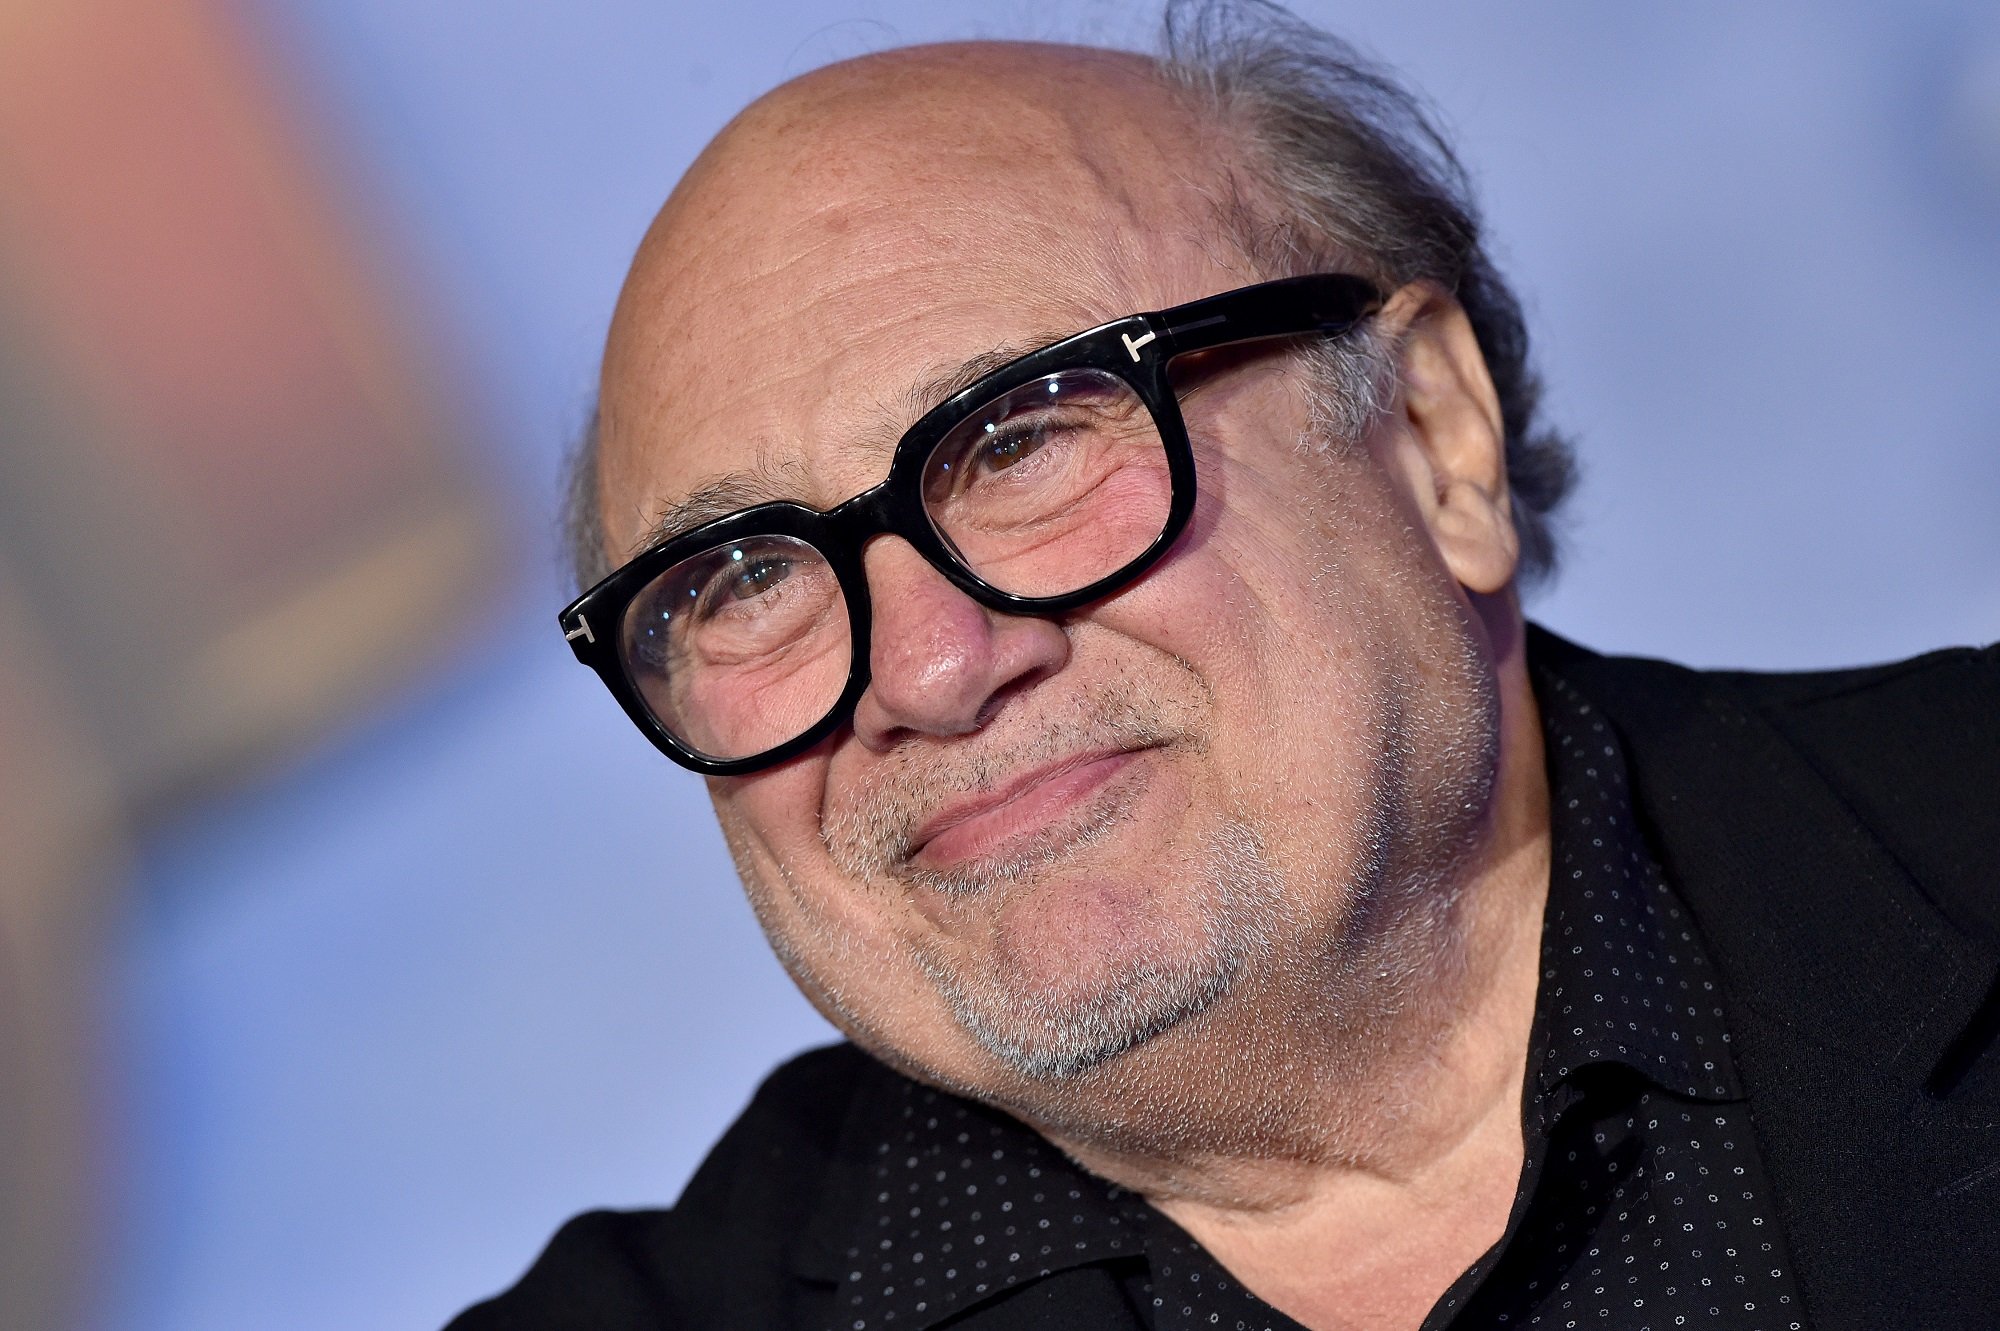 Danny DeVito Was So Stressed While Filming ‘One Flew Over the Cuckoo’s Nest’ That He Talked to an Imaginary Friend and Consulted a Psychiatrist